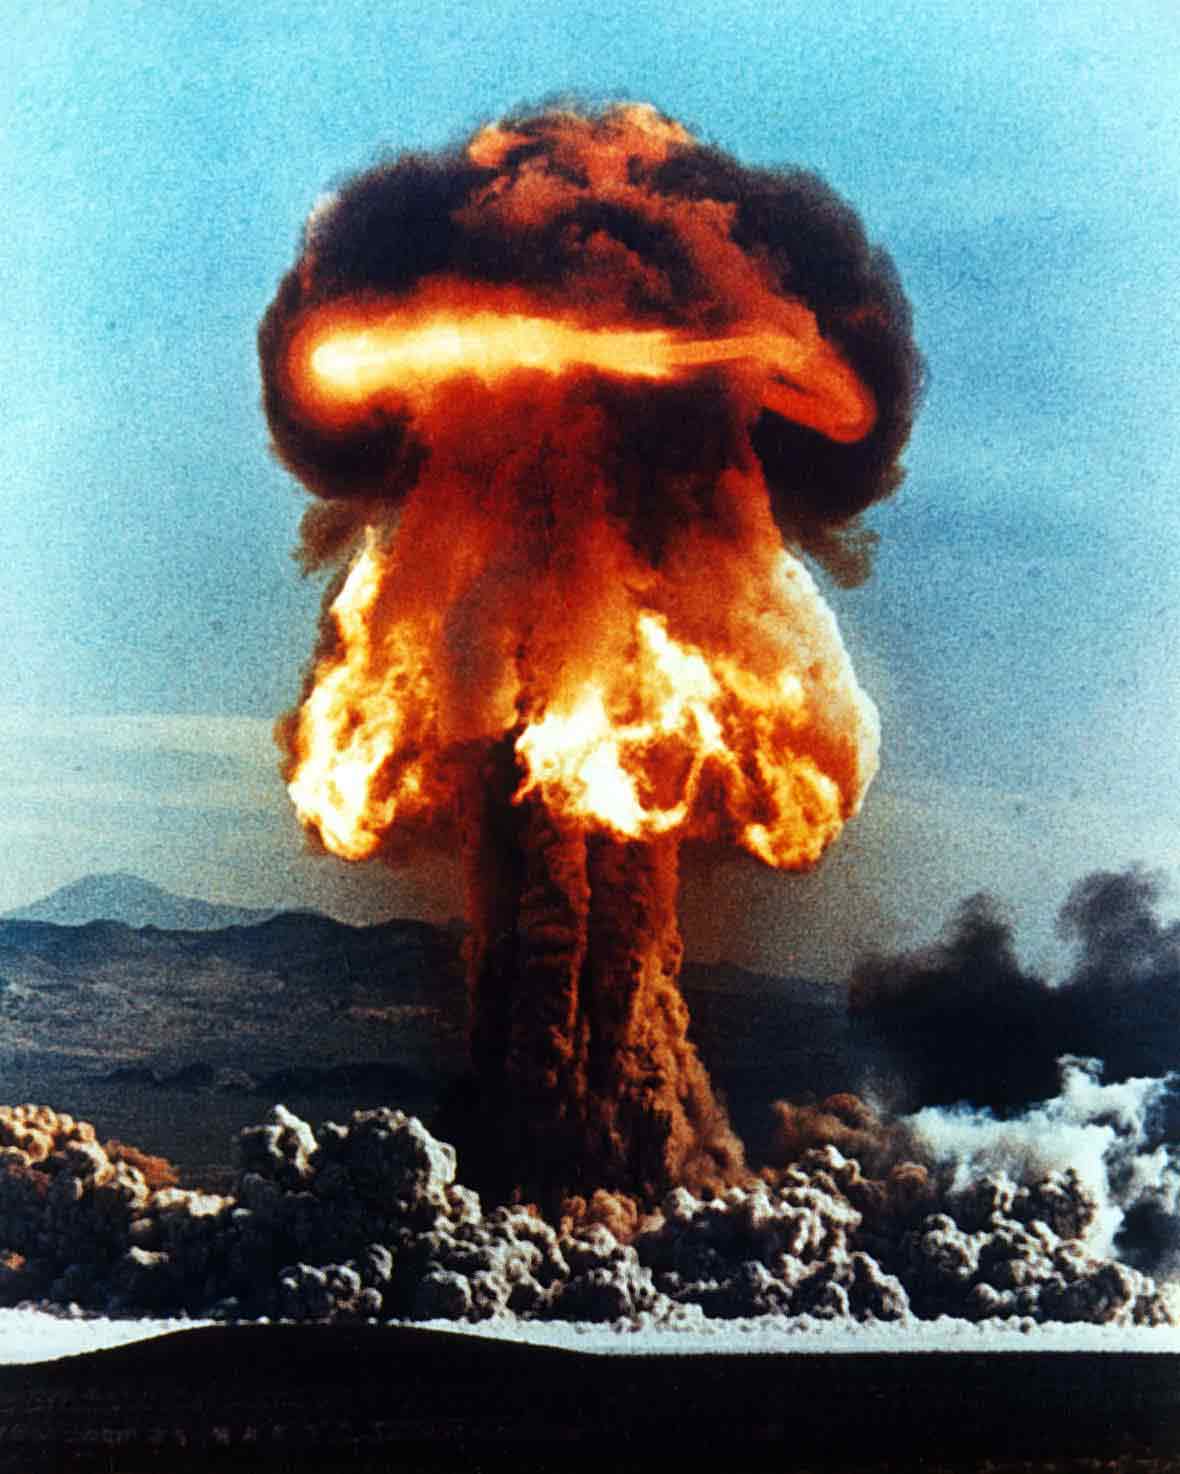 ... up: Every Nuclear Explosion Since 1945 | Downwinders | Nuclear Law